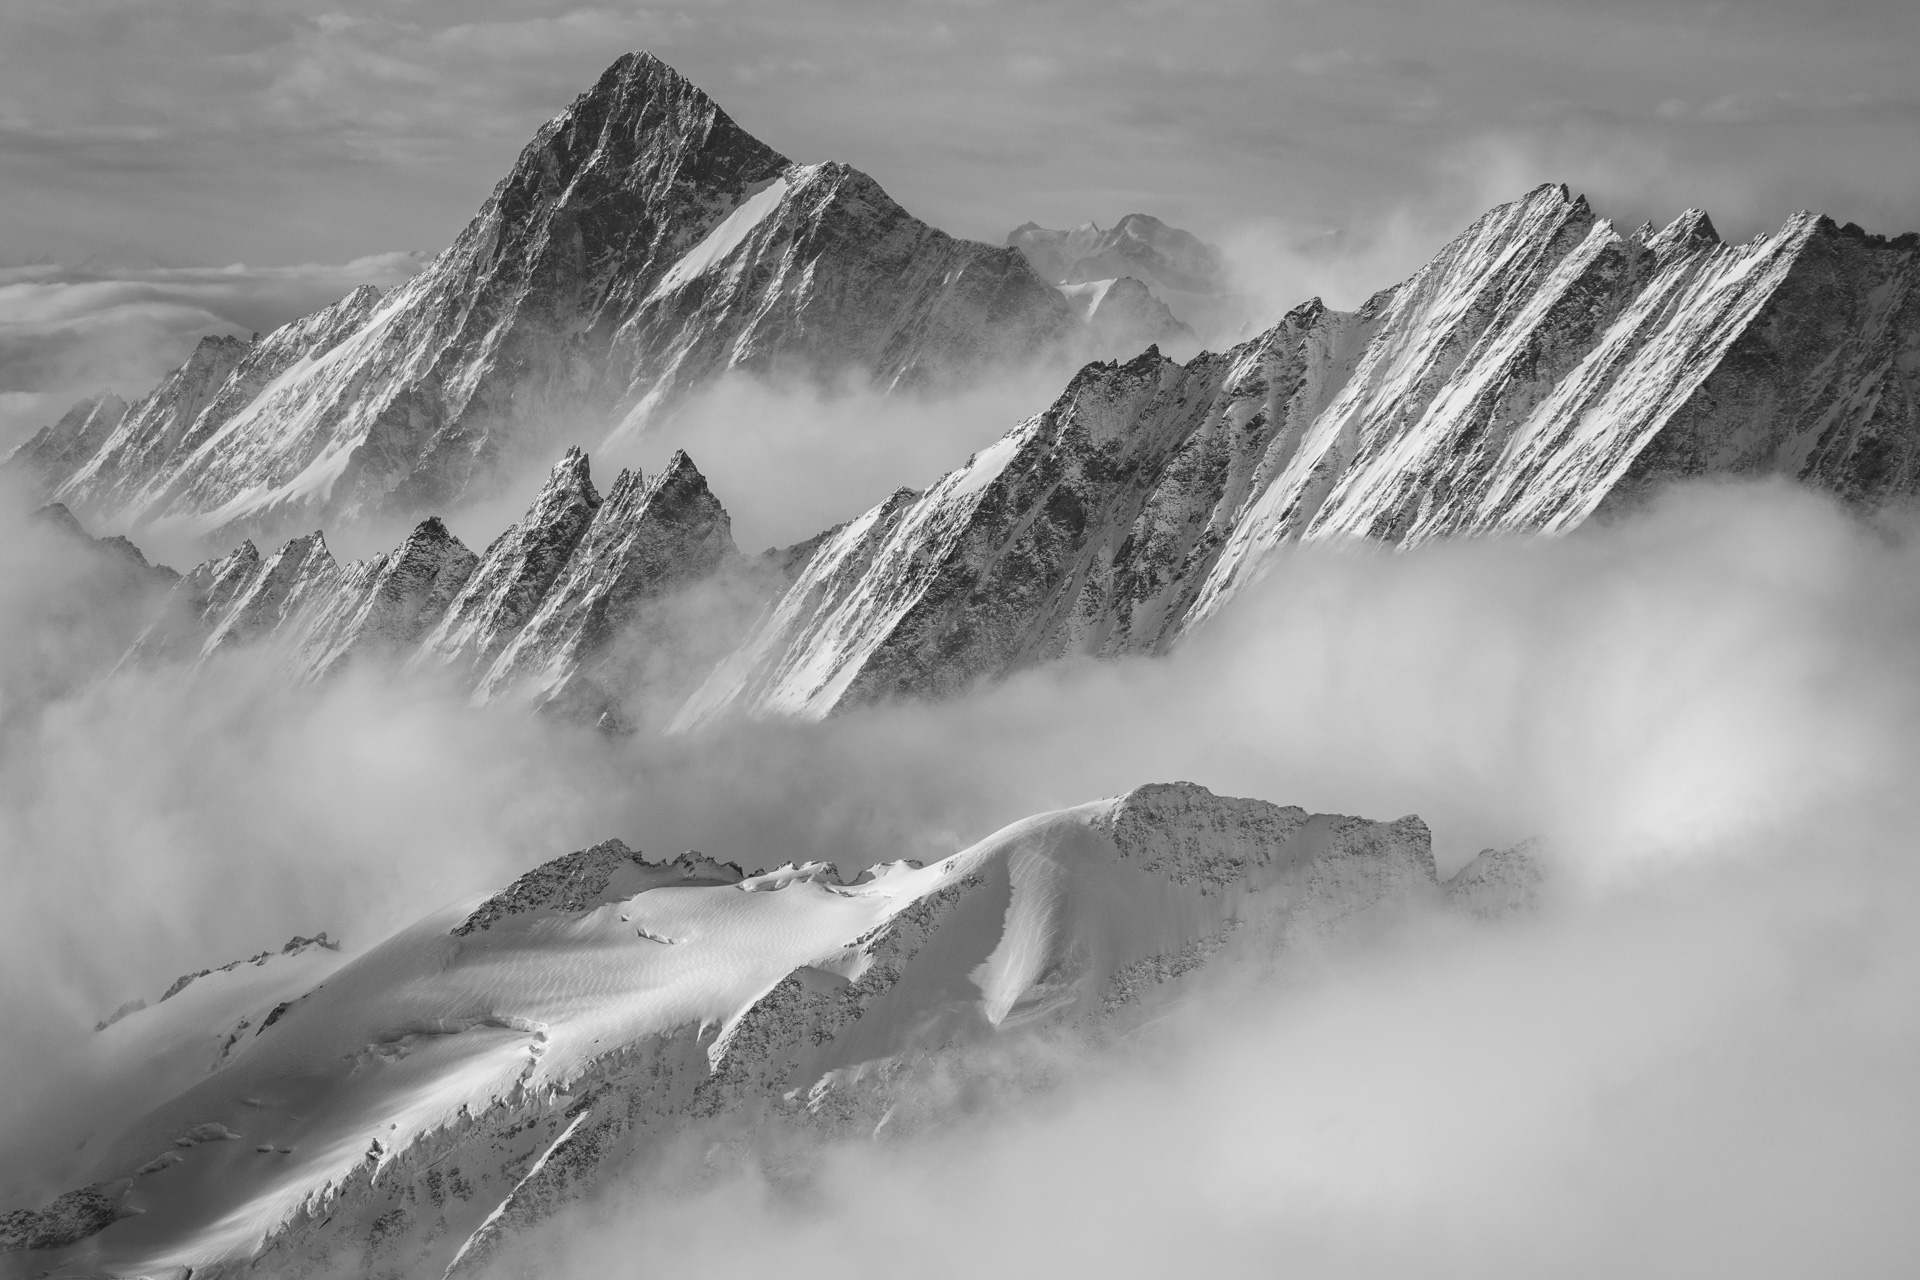 Finsteraarhorn - Mountain summit of the bernese alps in black and white